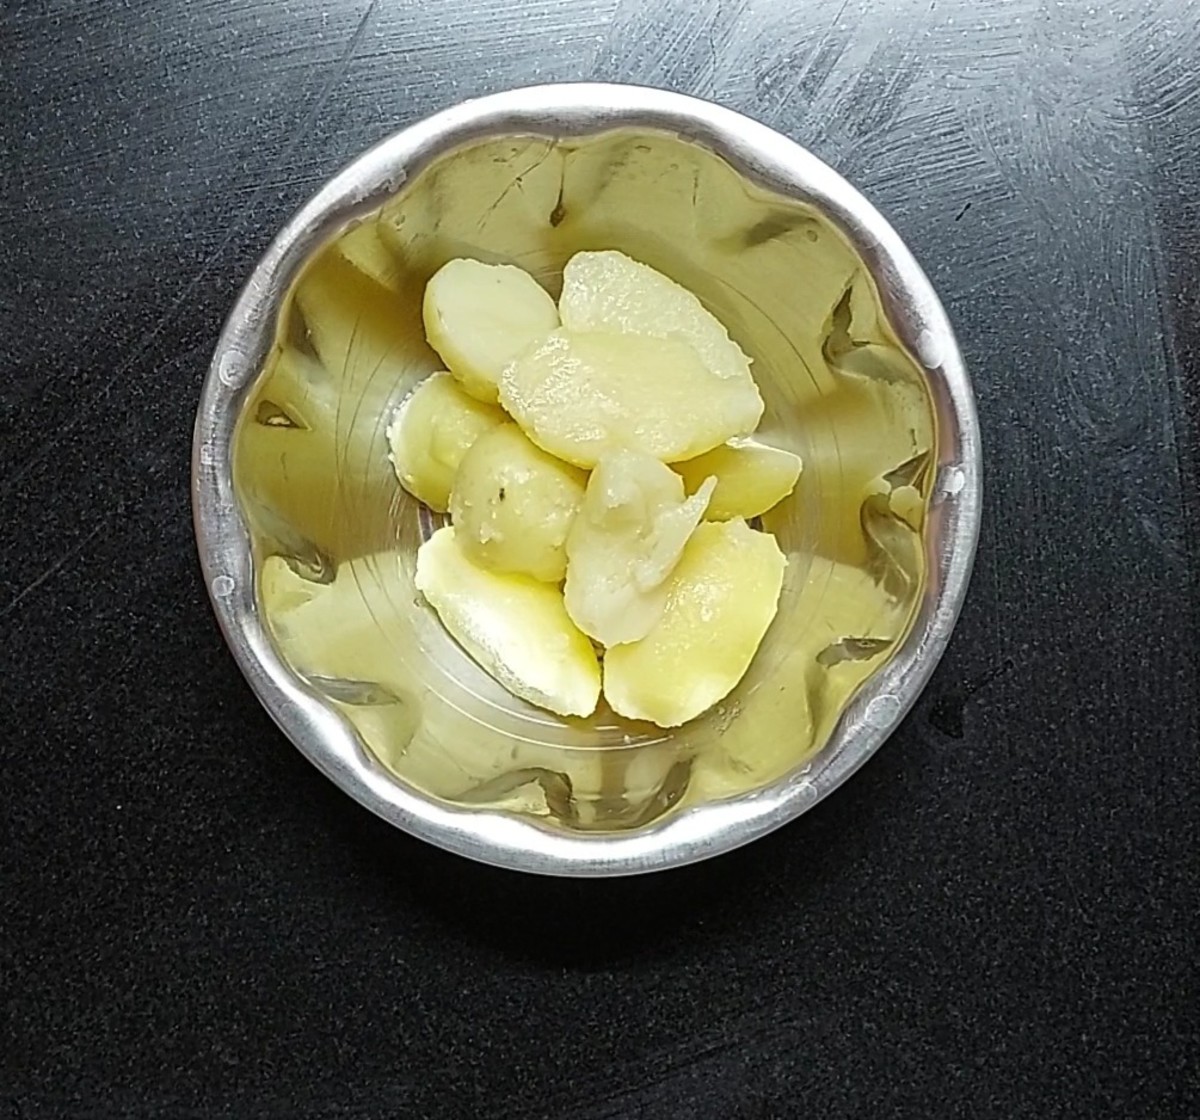 In a vessel, place 4-5 cooked and peeled potatoes.